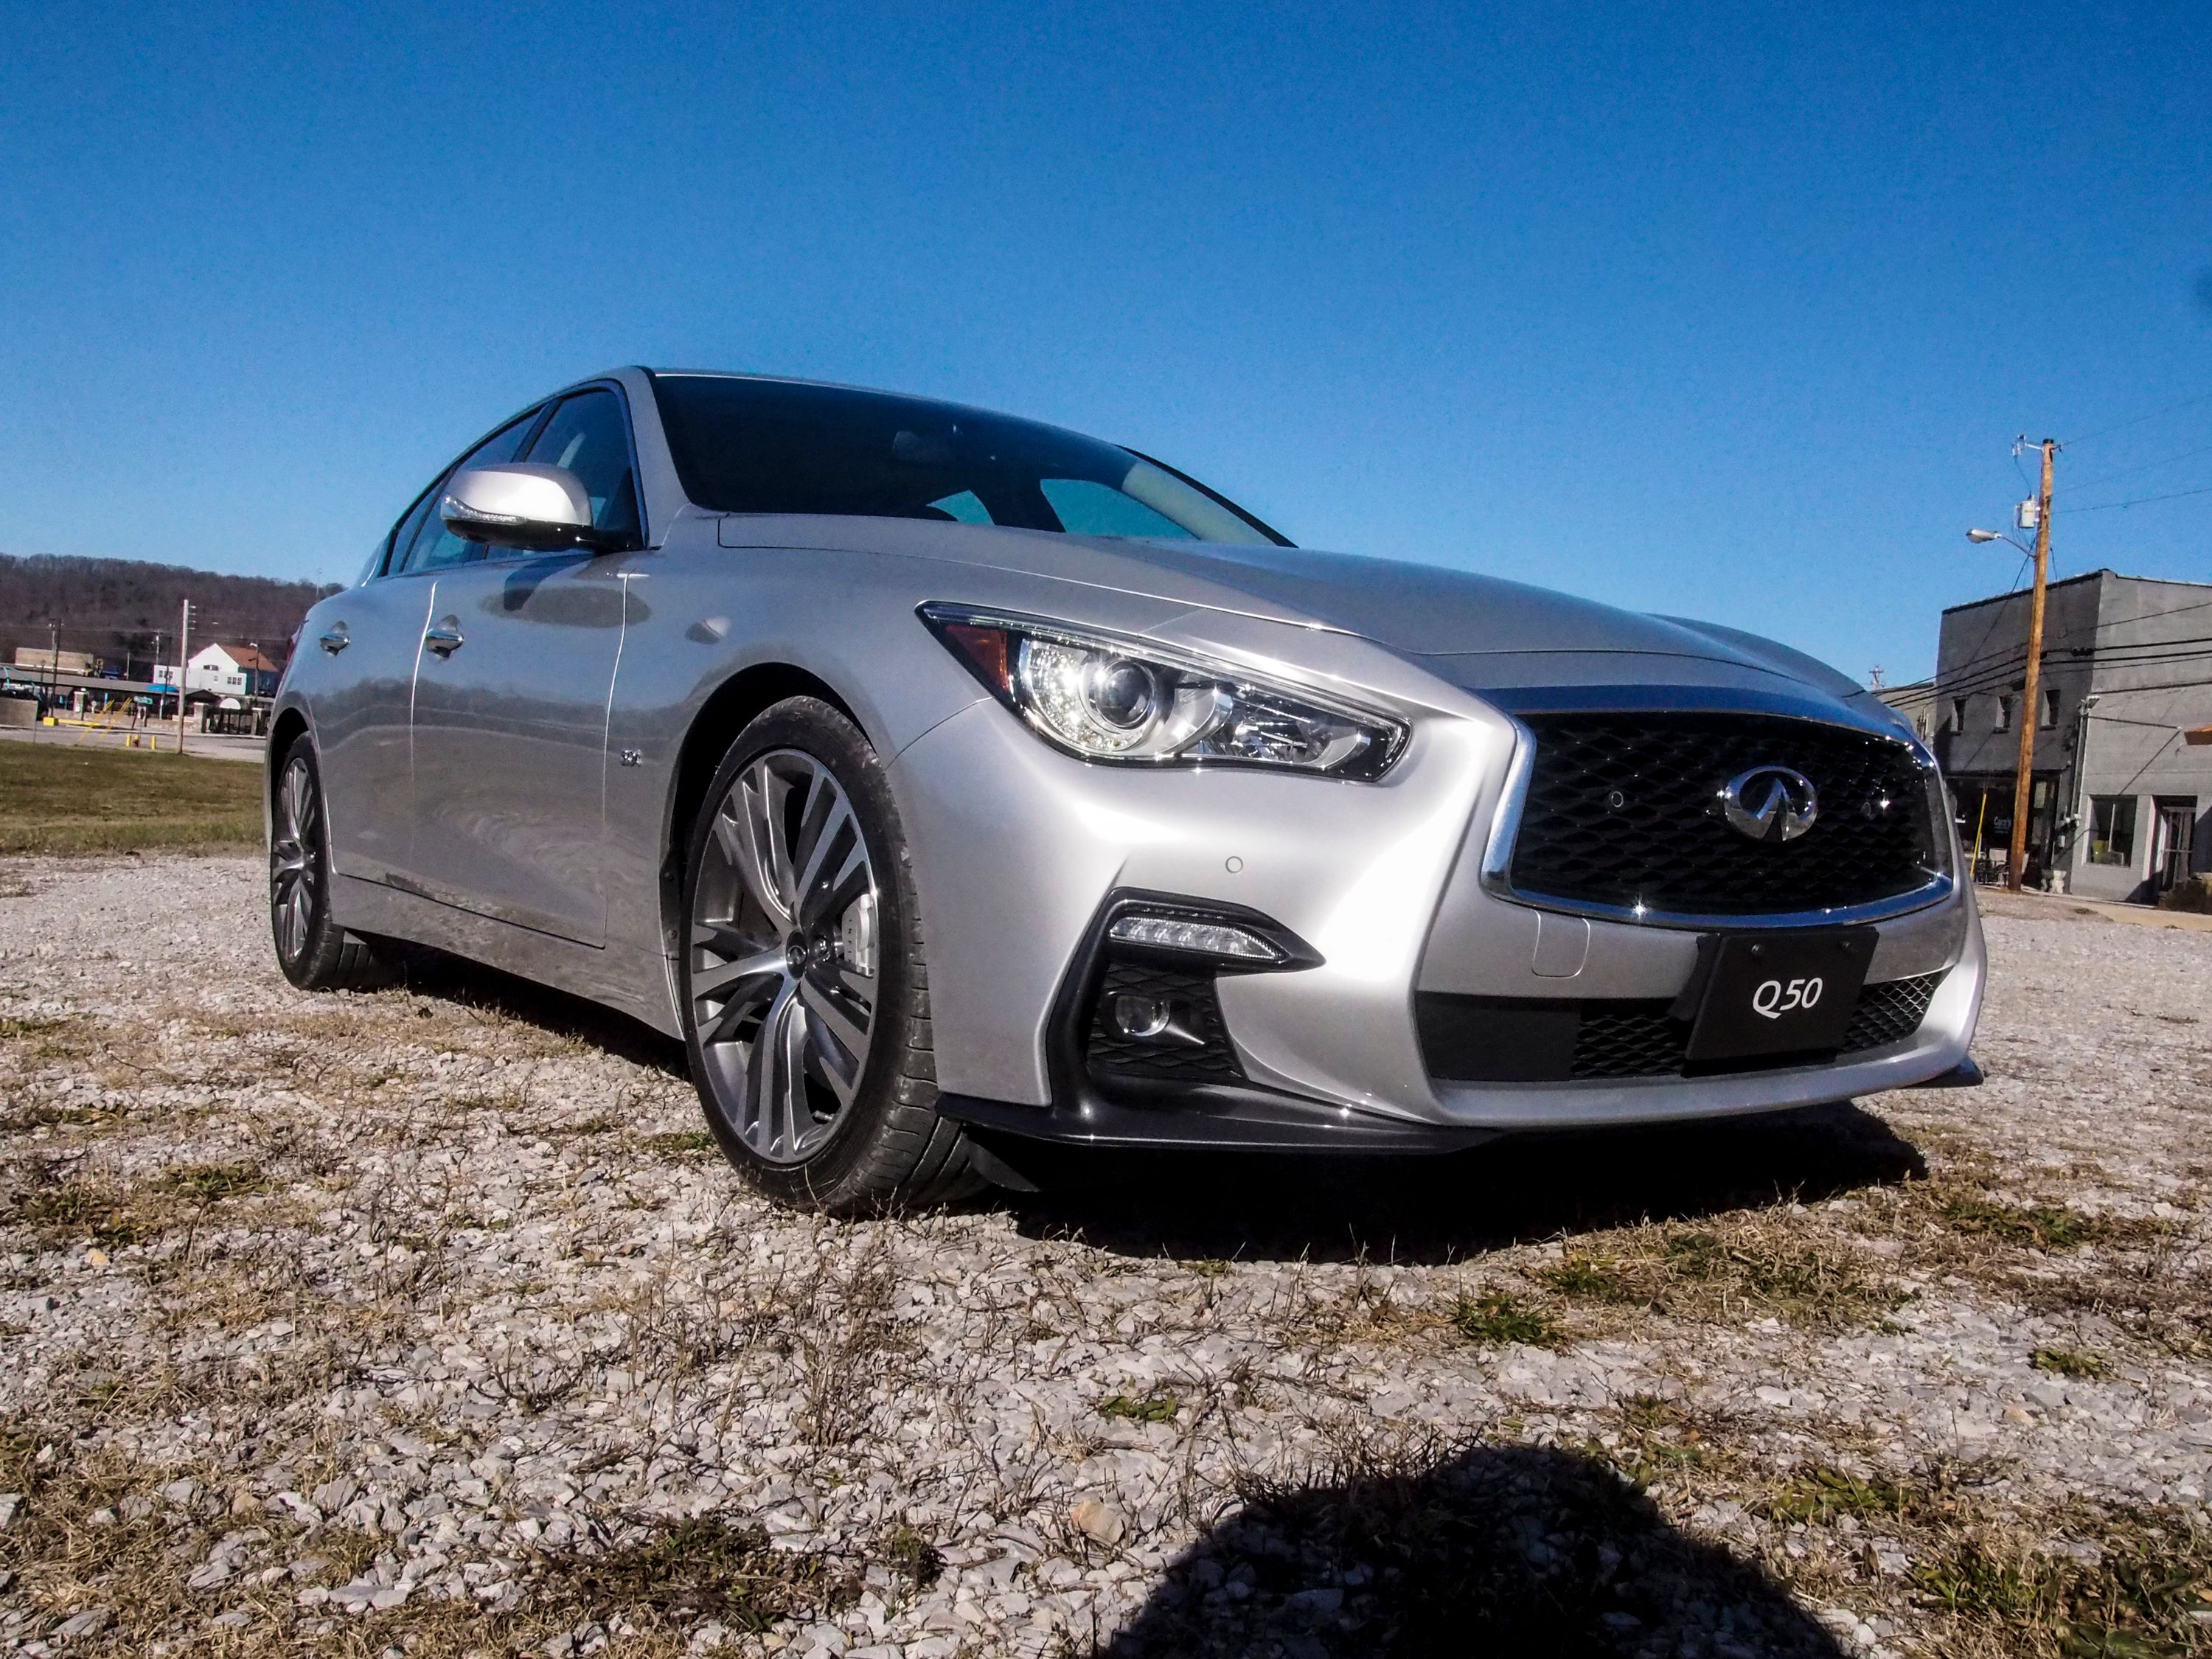 Infiniti Sports Cars: Why Are They So Underrated?